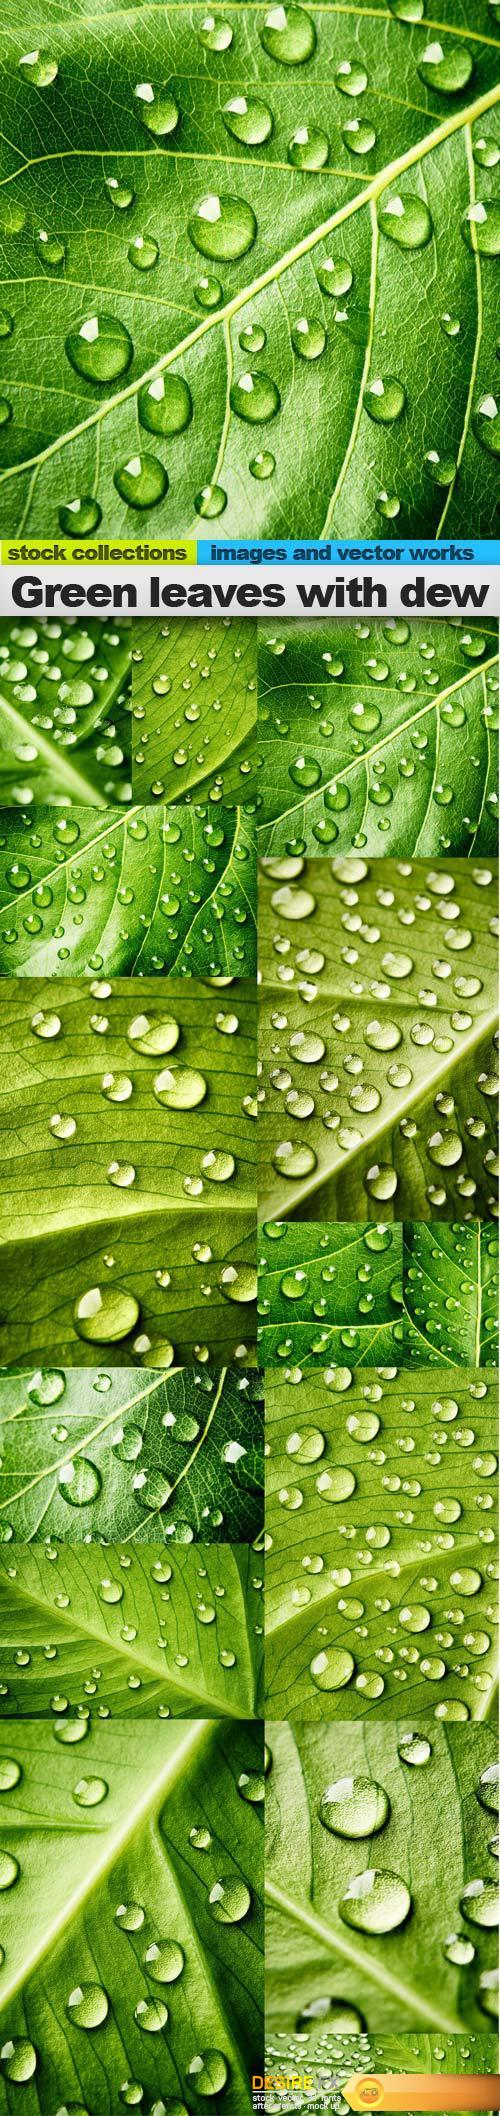 Green leaves with dew, 15 x UHQ JPEG